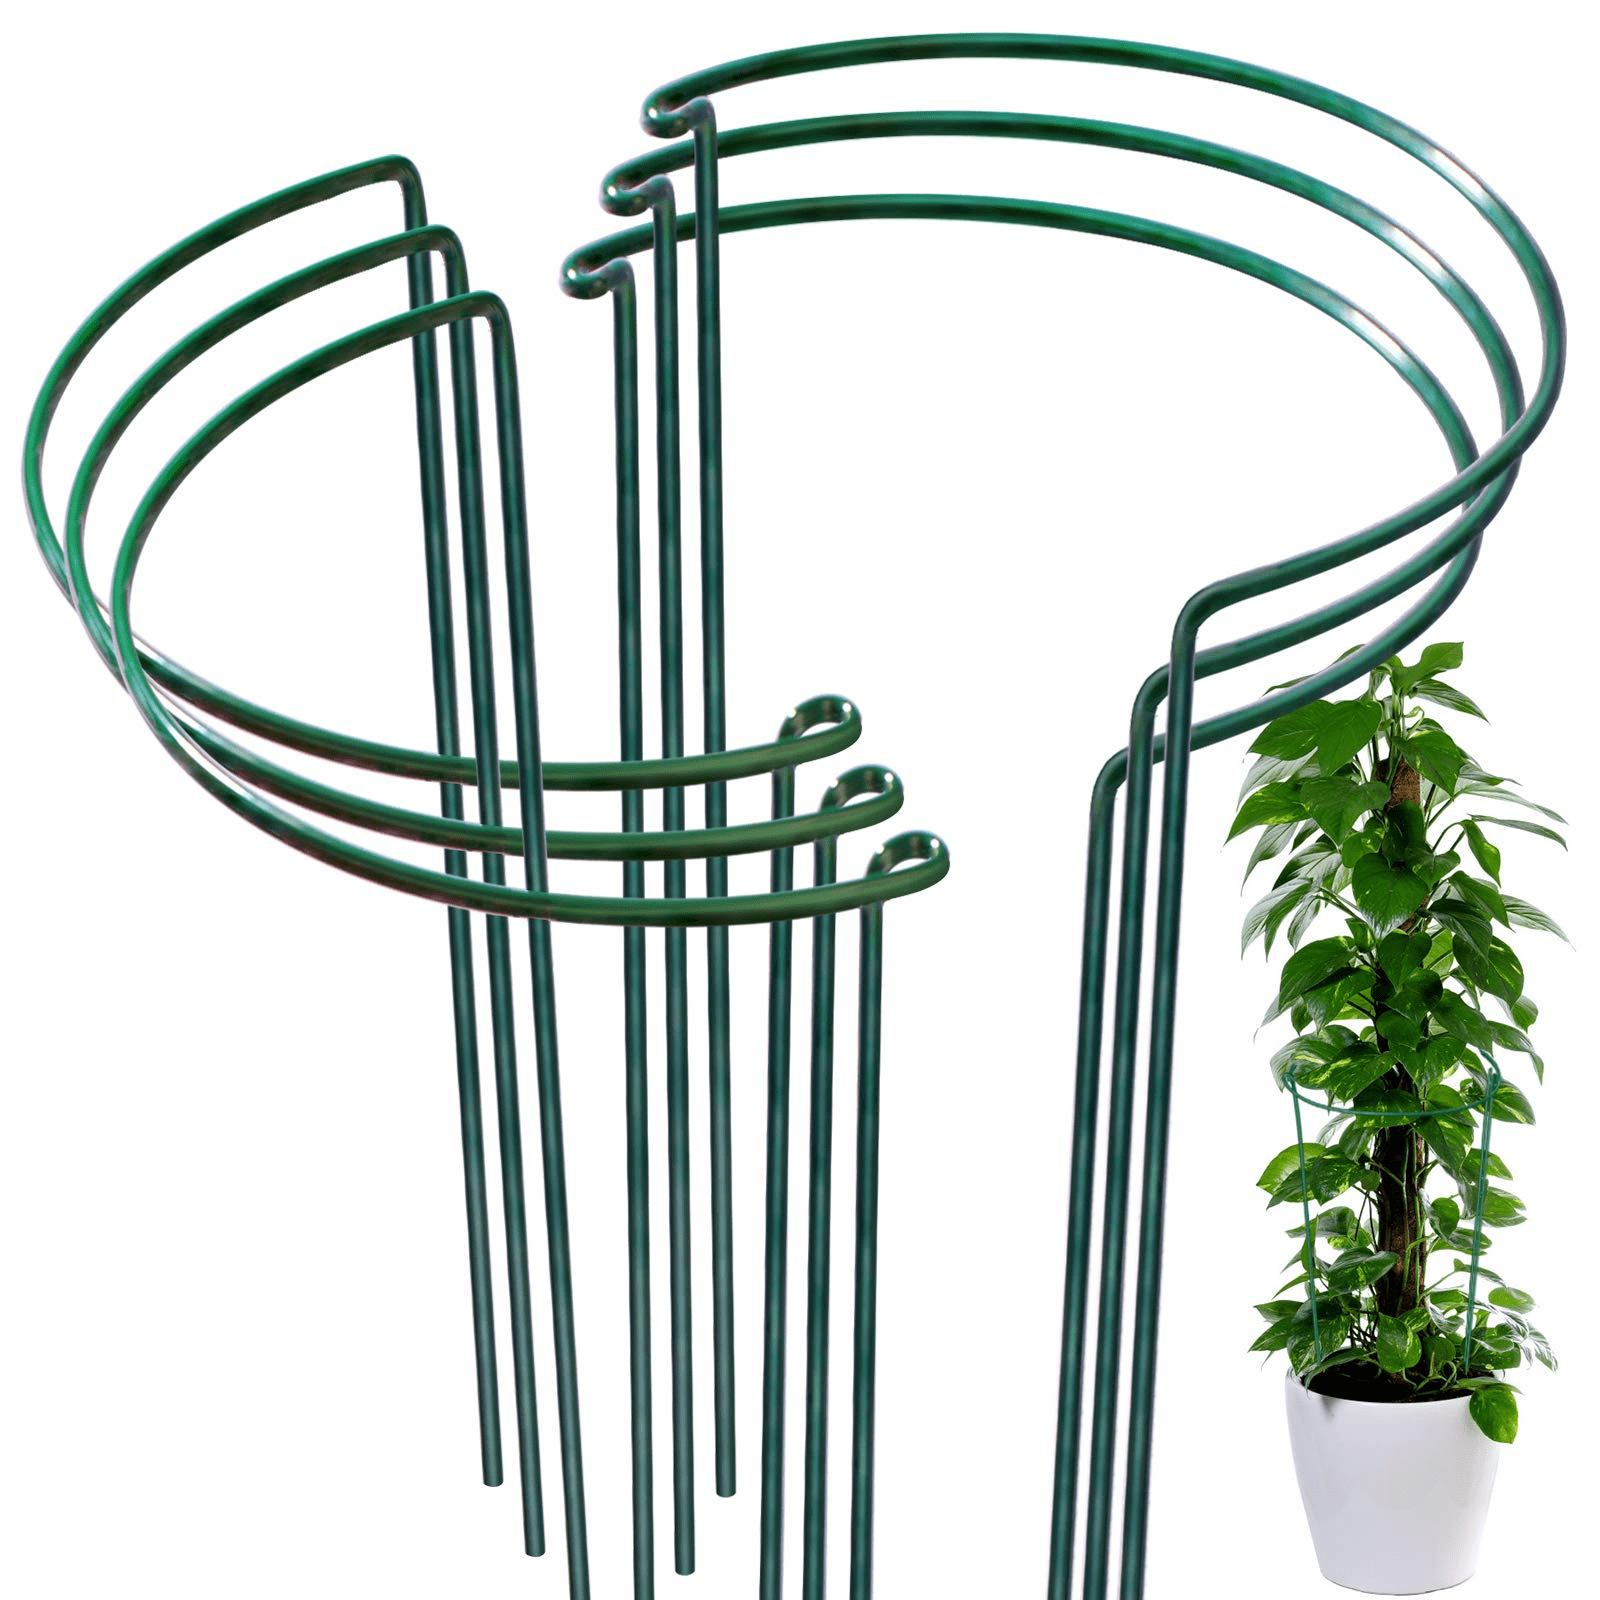 25cm PLANT/ FLOWER SUPPORT RING FOR BAMBOO CANES 20 X 10 INCH 